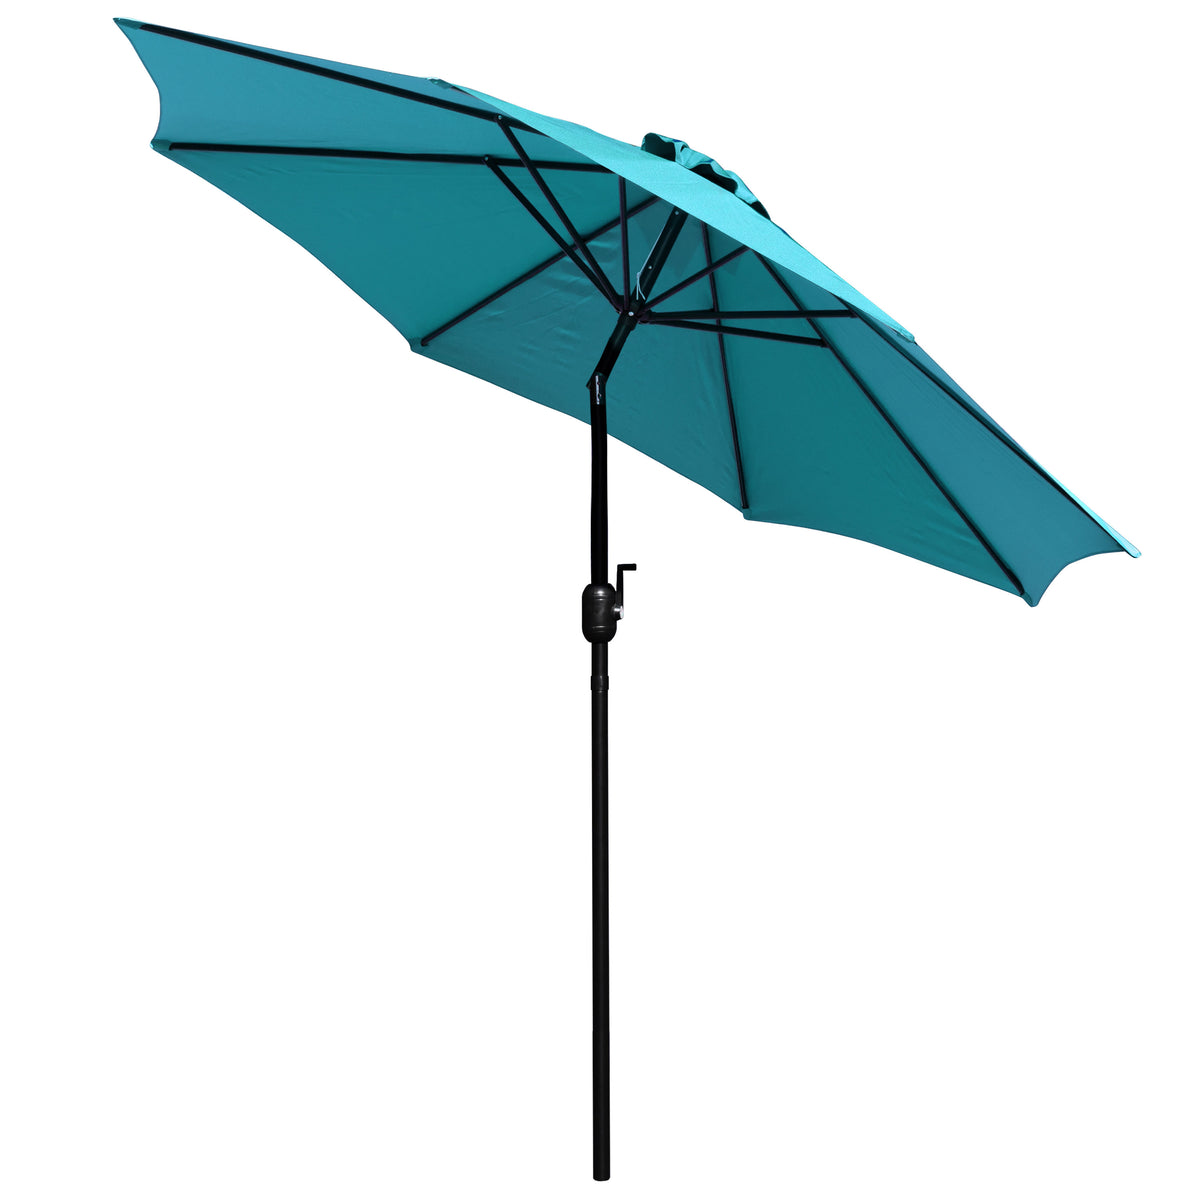 Teal |#| 35inch Square Faux Teak Patio Table, 2 Chairs and Teal 9FT Patio Umbrella with Base